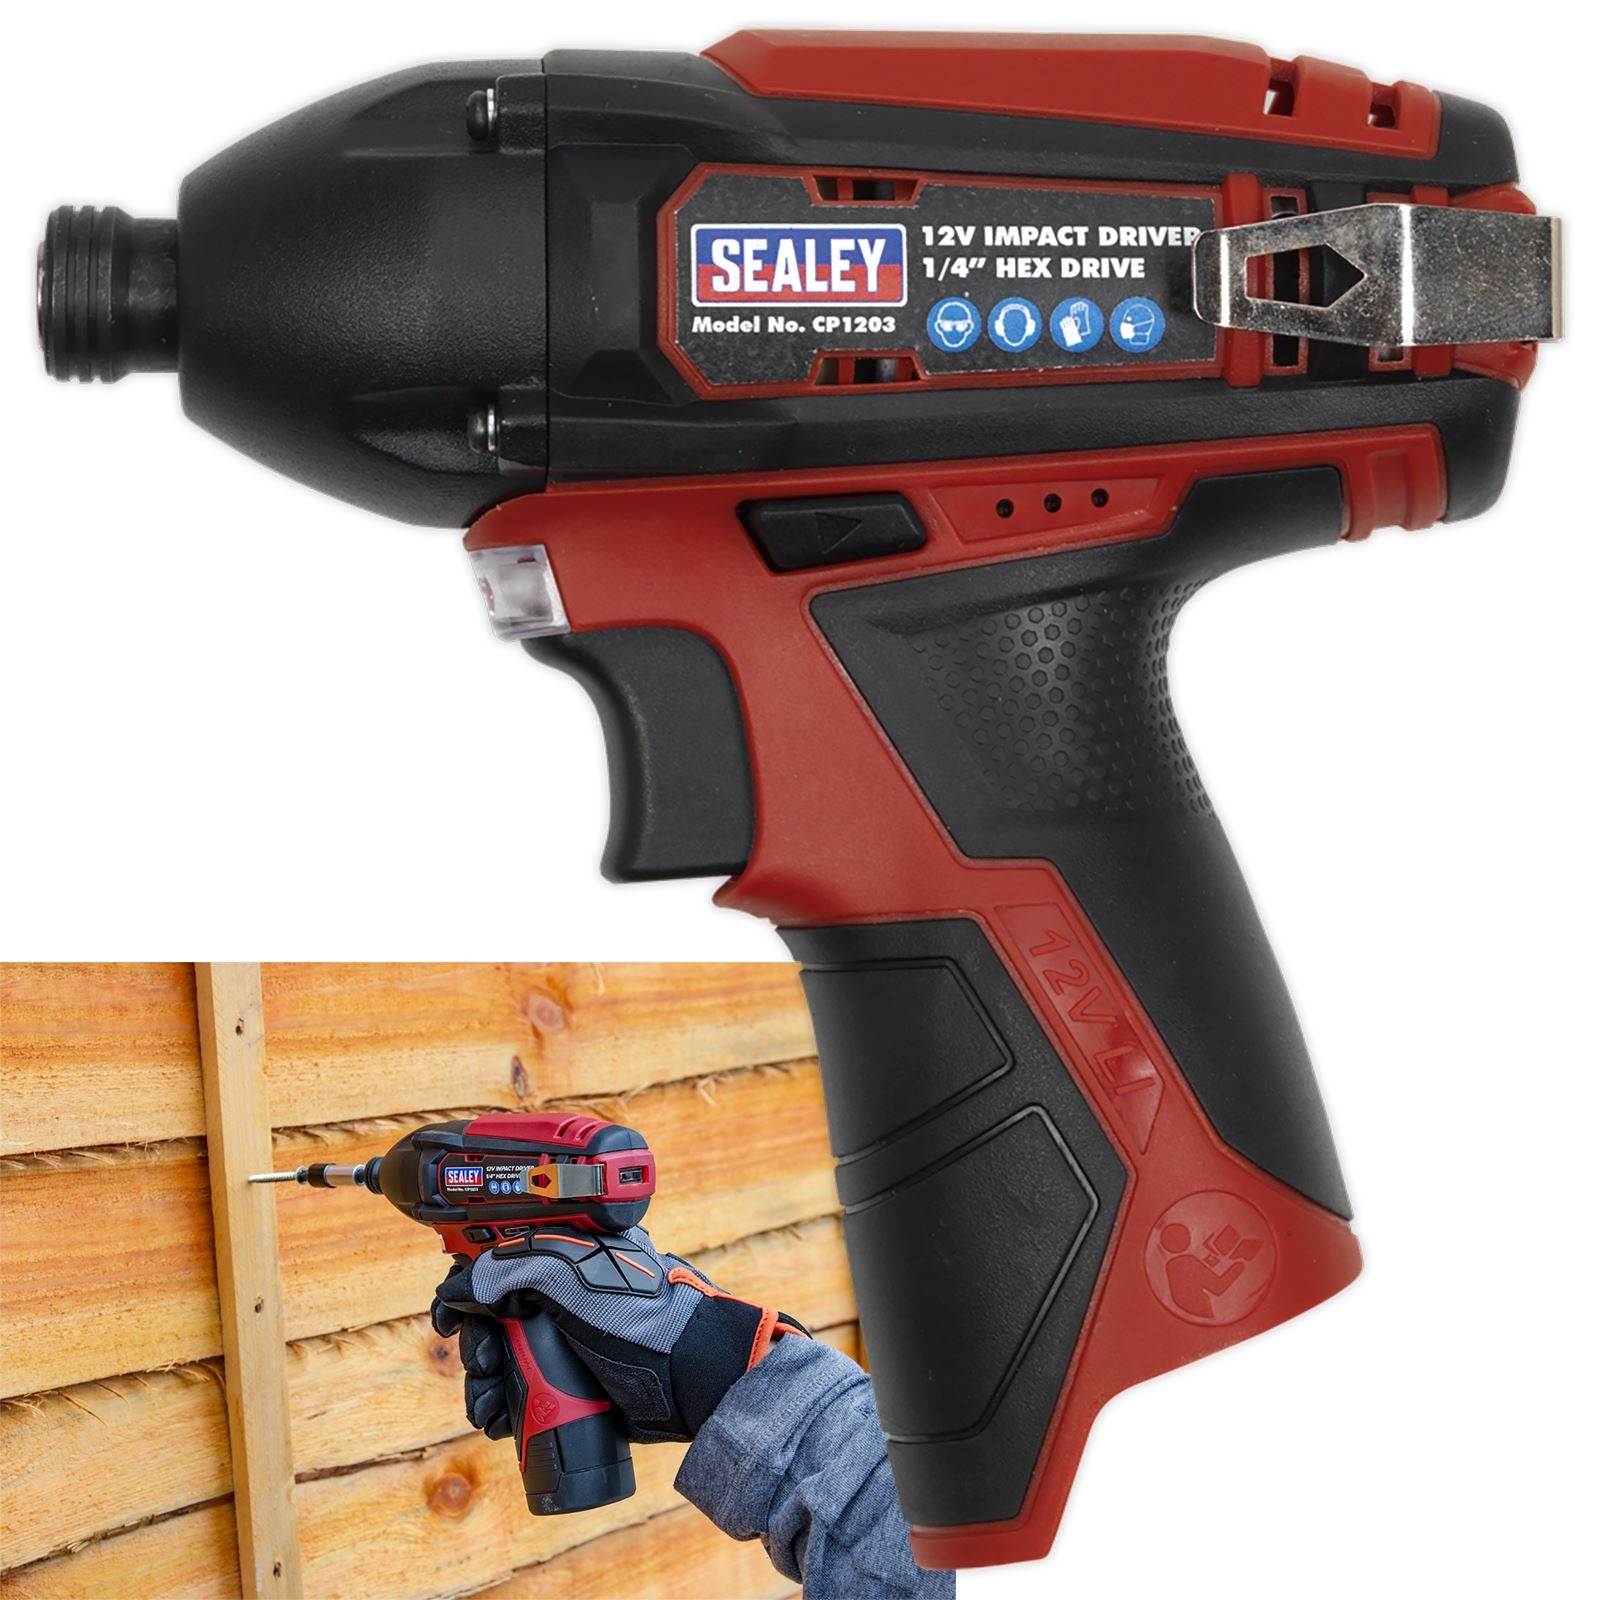 Sealey Cordless Impact Driver 1/4"Hex Drive 12V SV12 Series - Body Only